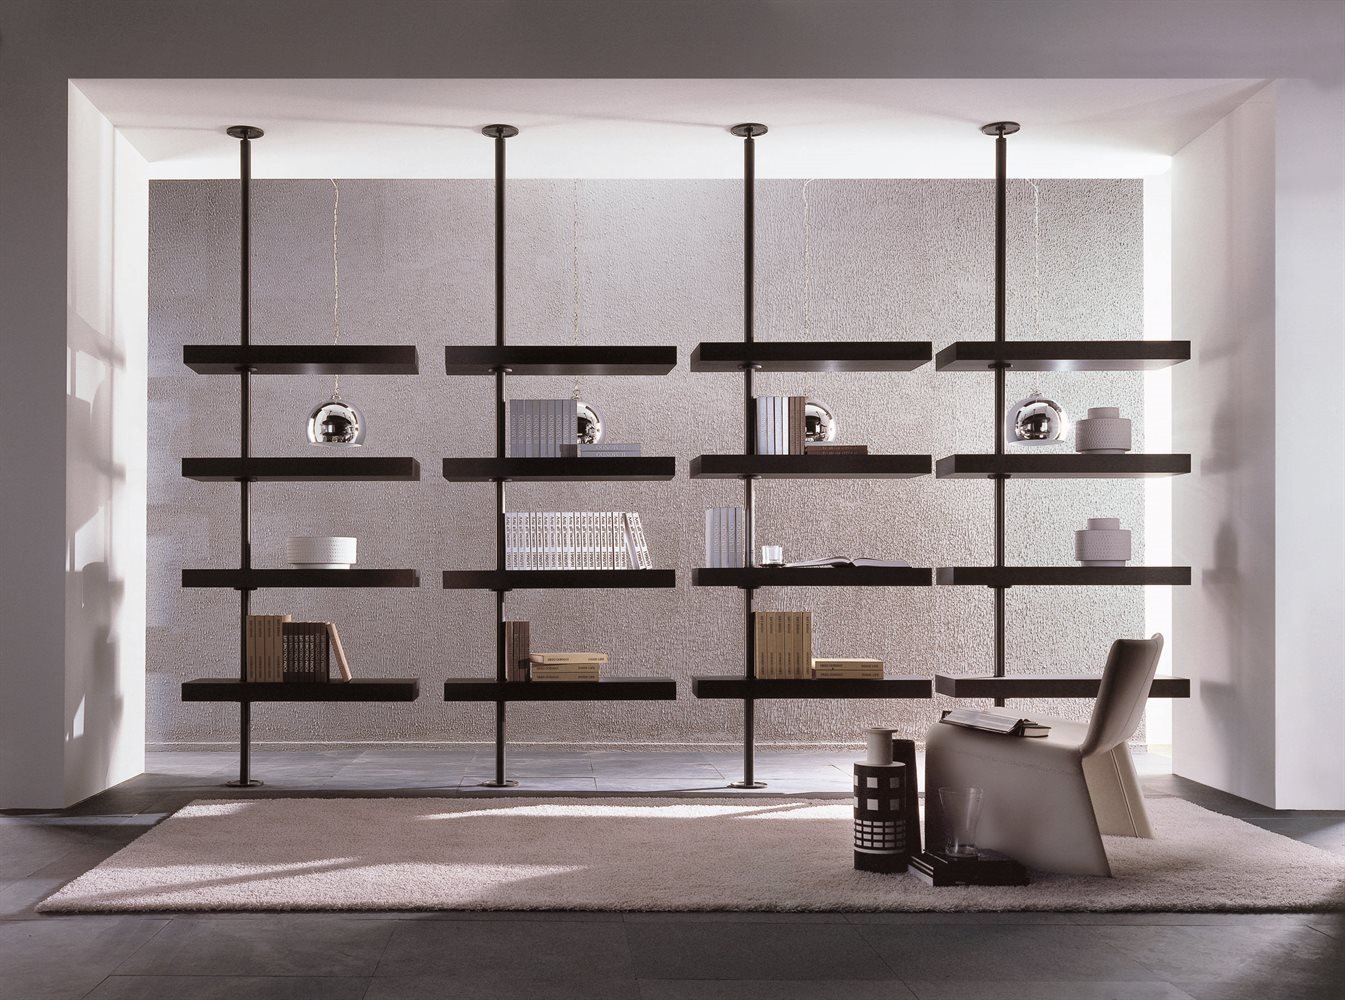 Porada Domino Expo Wall System Wooden, Floor To Ceiling Shelving System